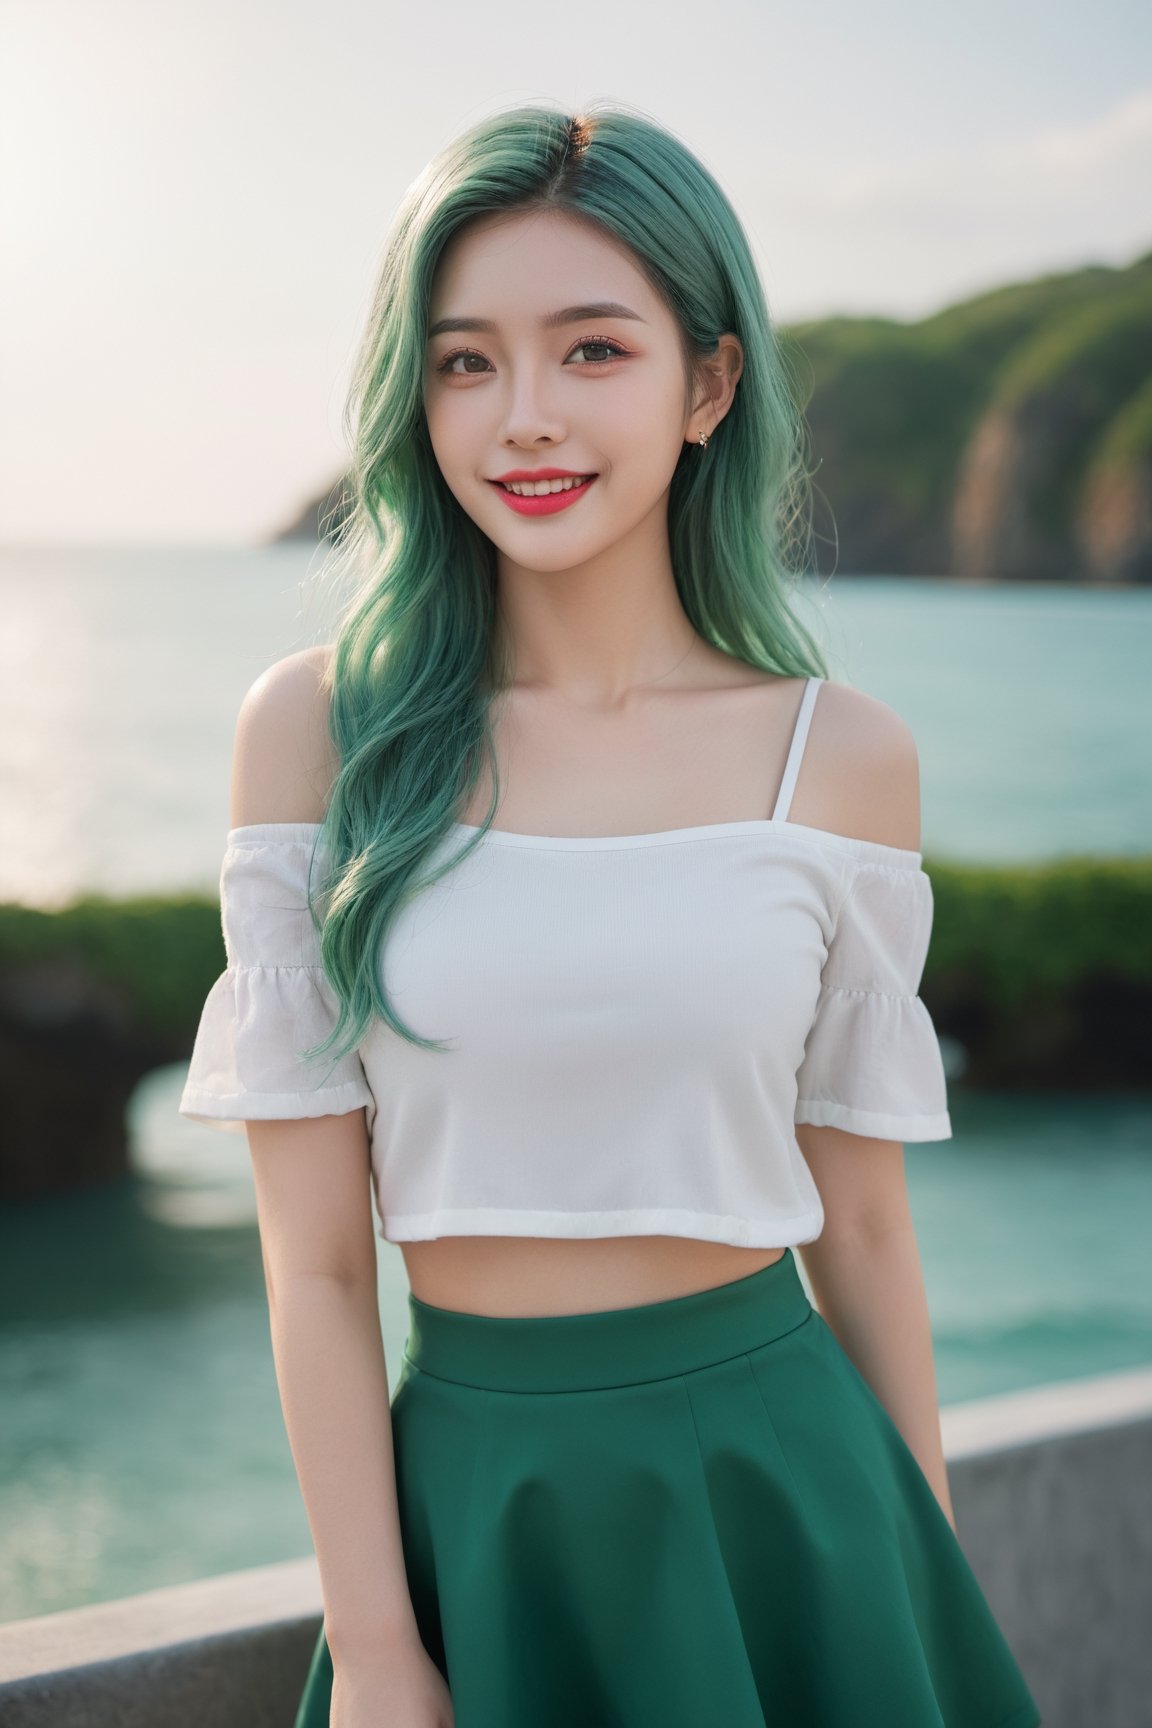 Best Quality,Masterpiece,Ultra High Resolution,(Realisticity:1.4),photorealistic,extreme detailed,Original Photo,1girl,portrait,(fullbody),long hair,pink & green hair,solo,(dynamic posture:1.4),mini_skirt,(dark sea green tone:1.2),looking at the audiences,red lips,smile,50mm,F0.8,8K raw,depth of field,